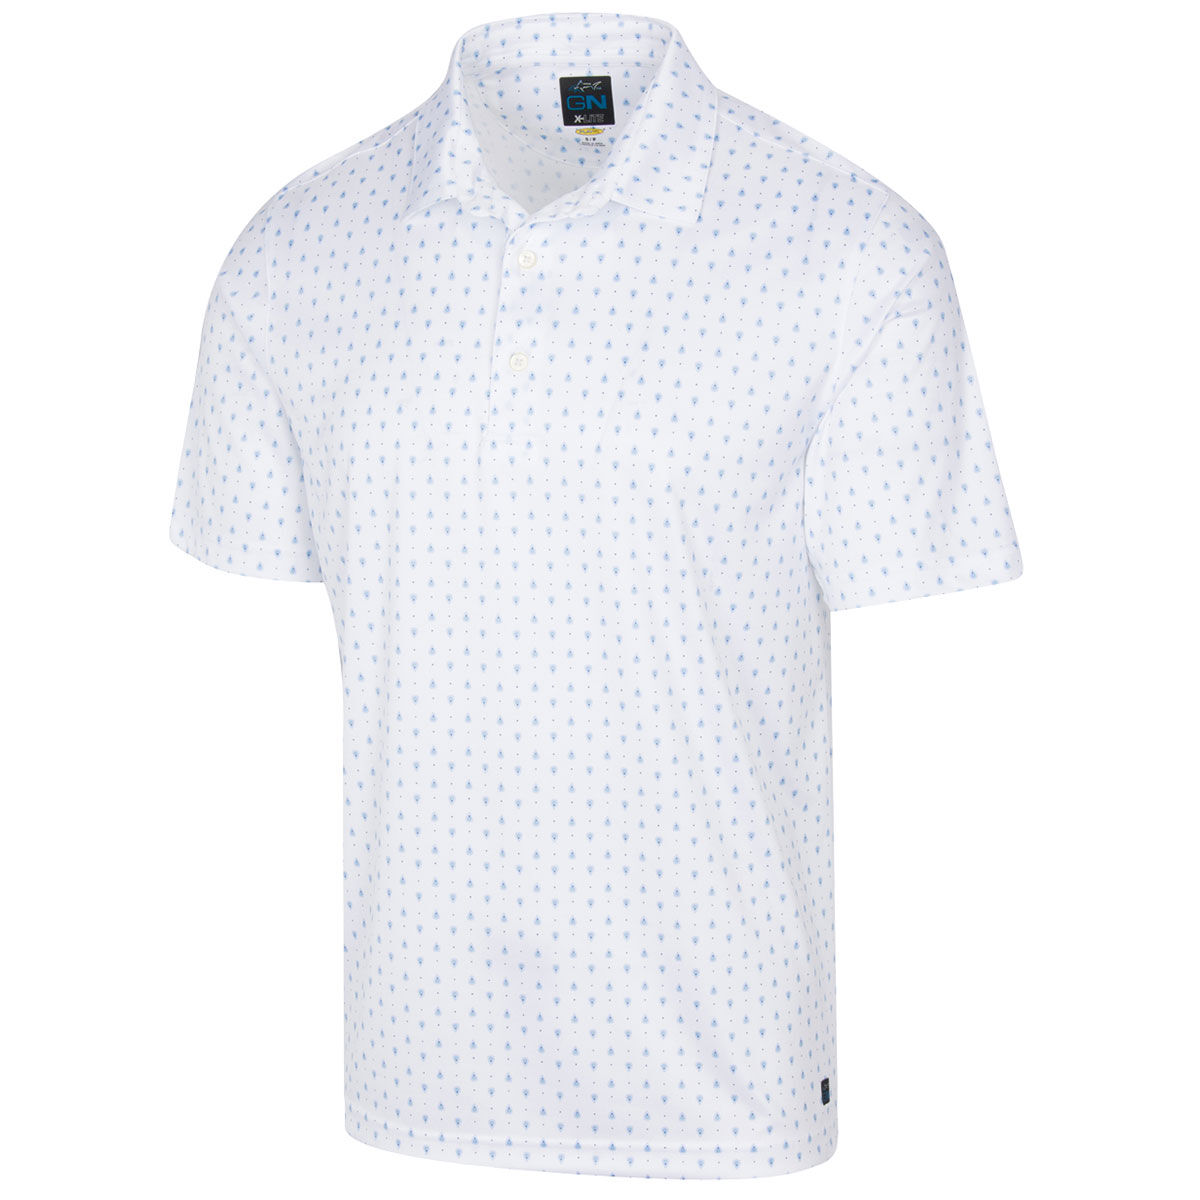 Greg Norman Men’s White and Blue Comfortable Paisley Foulard Golf Polo Shirt, Size: S | American Golf